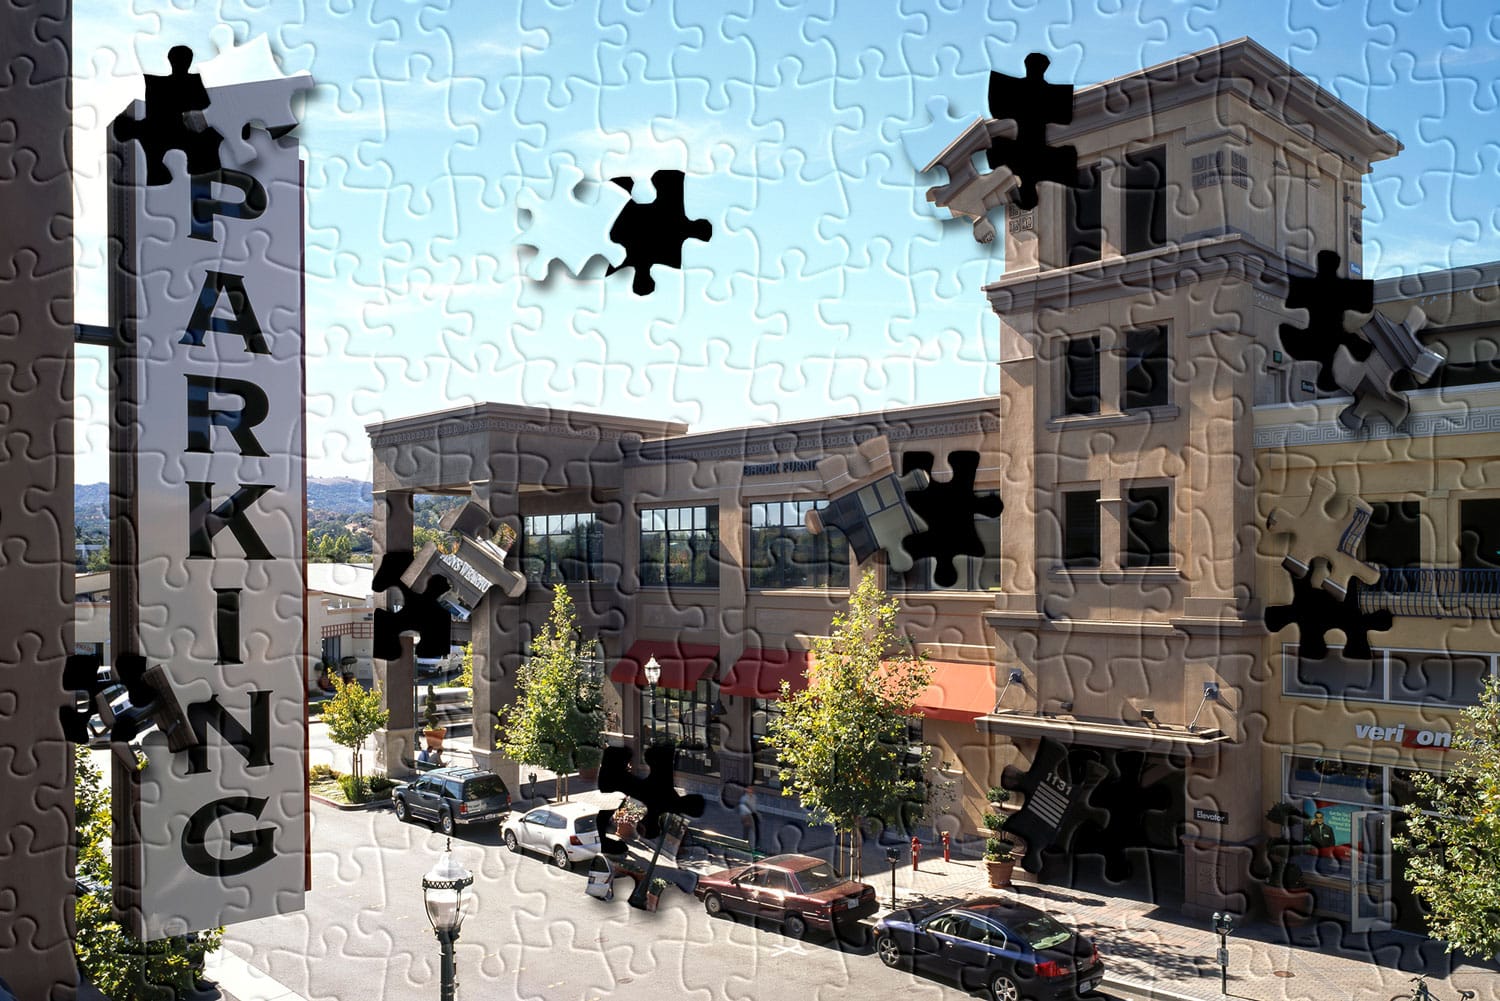 Photo of a parking garage transformed into puzzle illustration